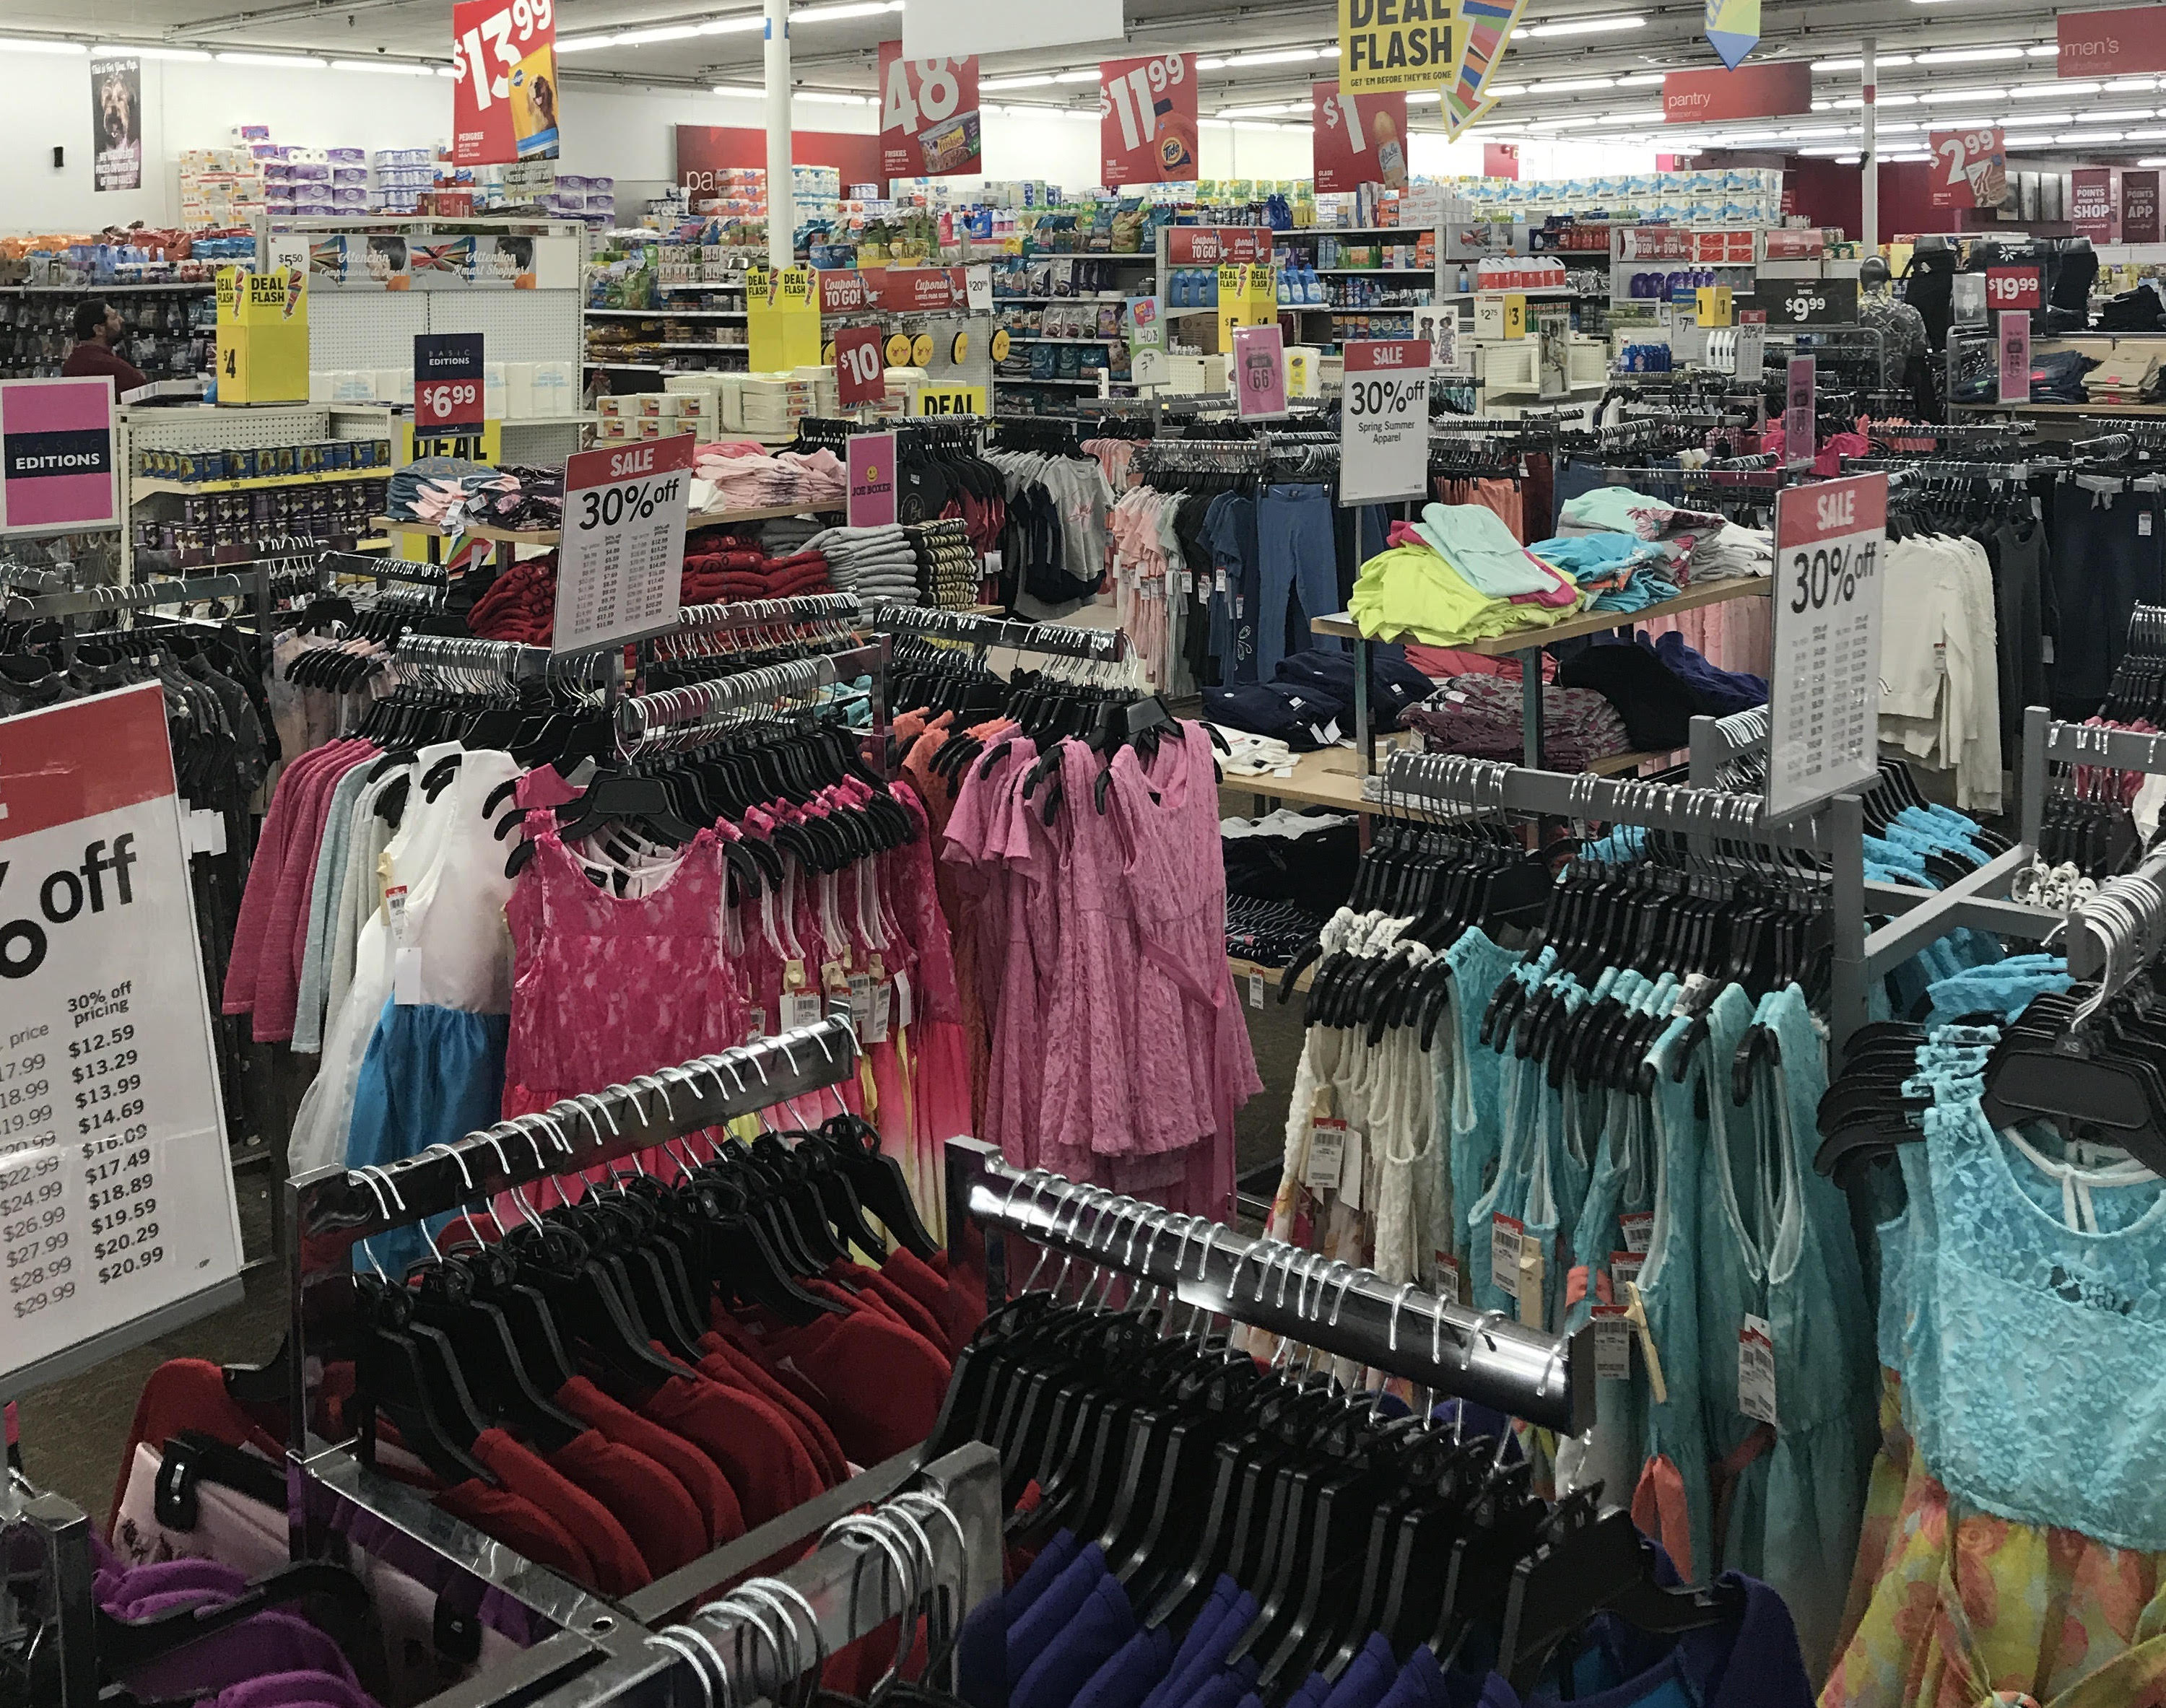 Kmart Is Dying: Photos, Store Tour, 57% OFF